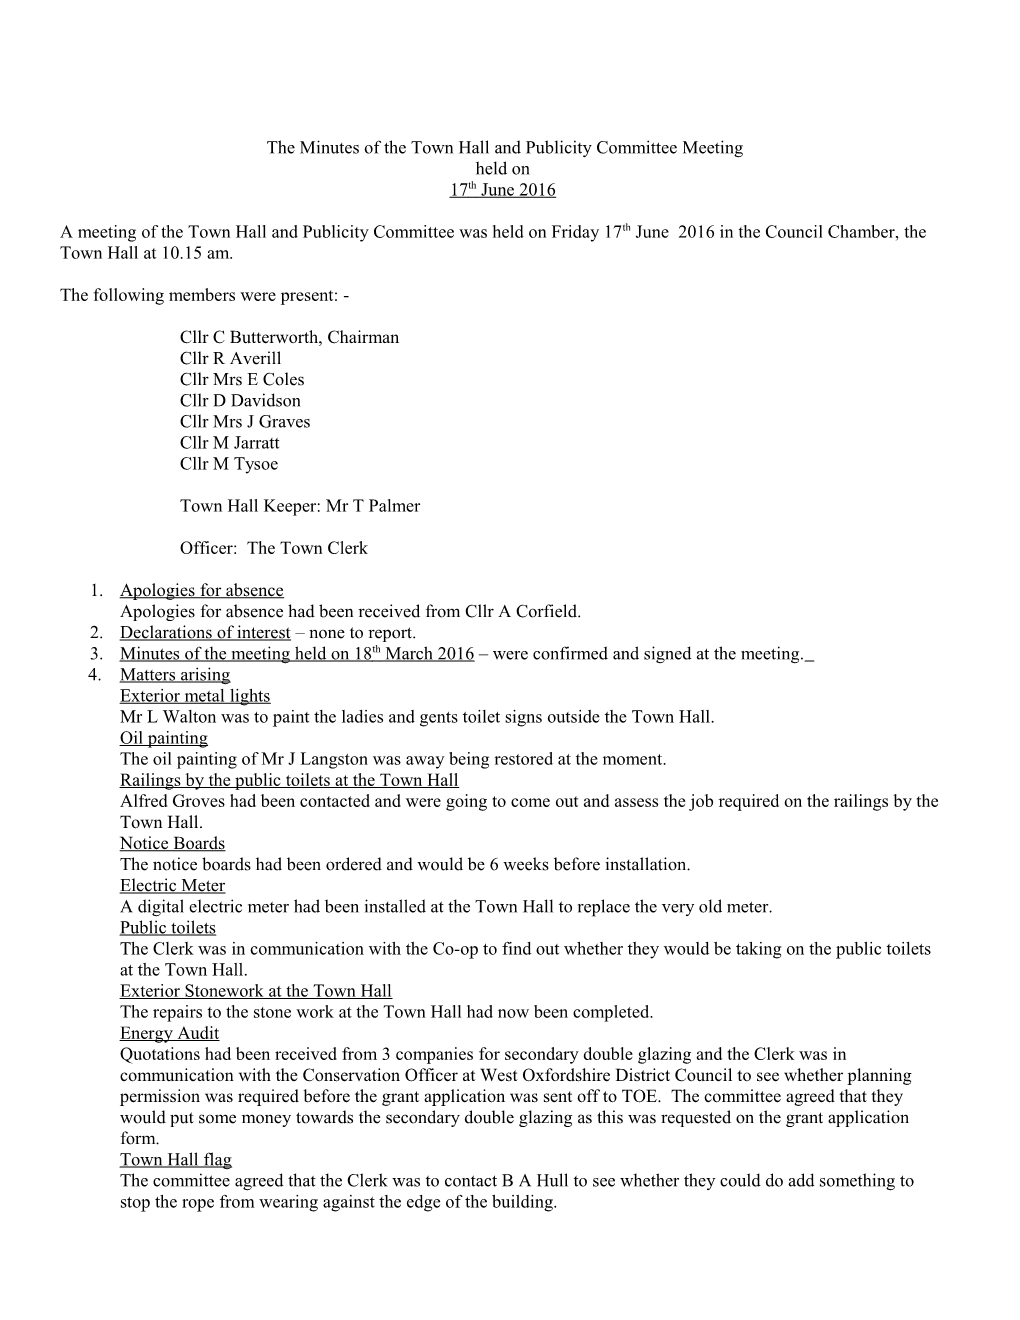 The Minutes of the Town Hall and Publicity Committee Meeting